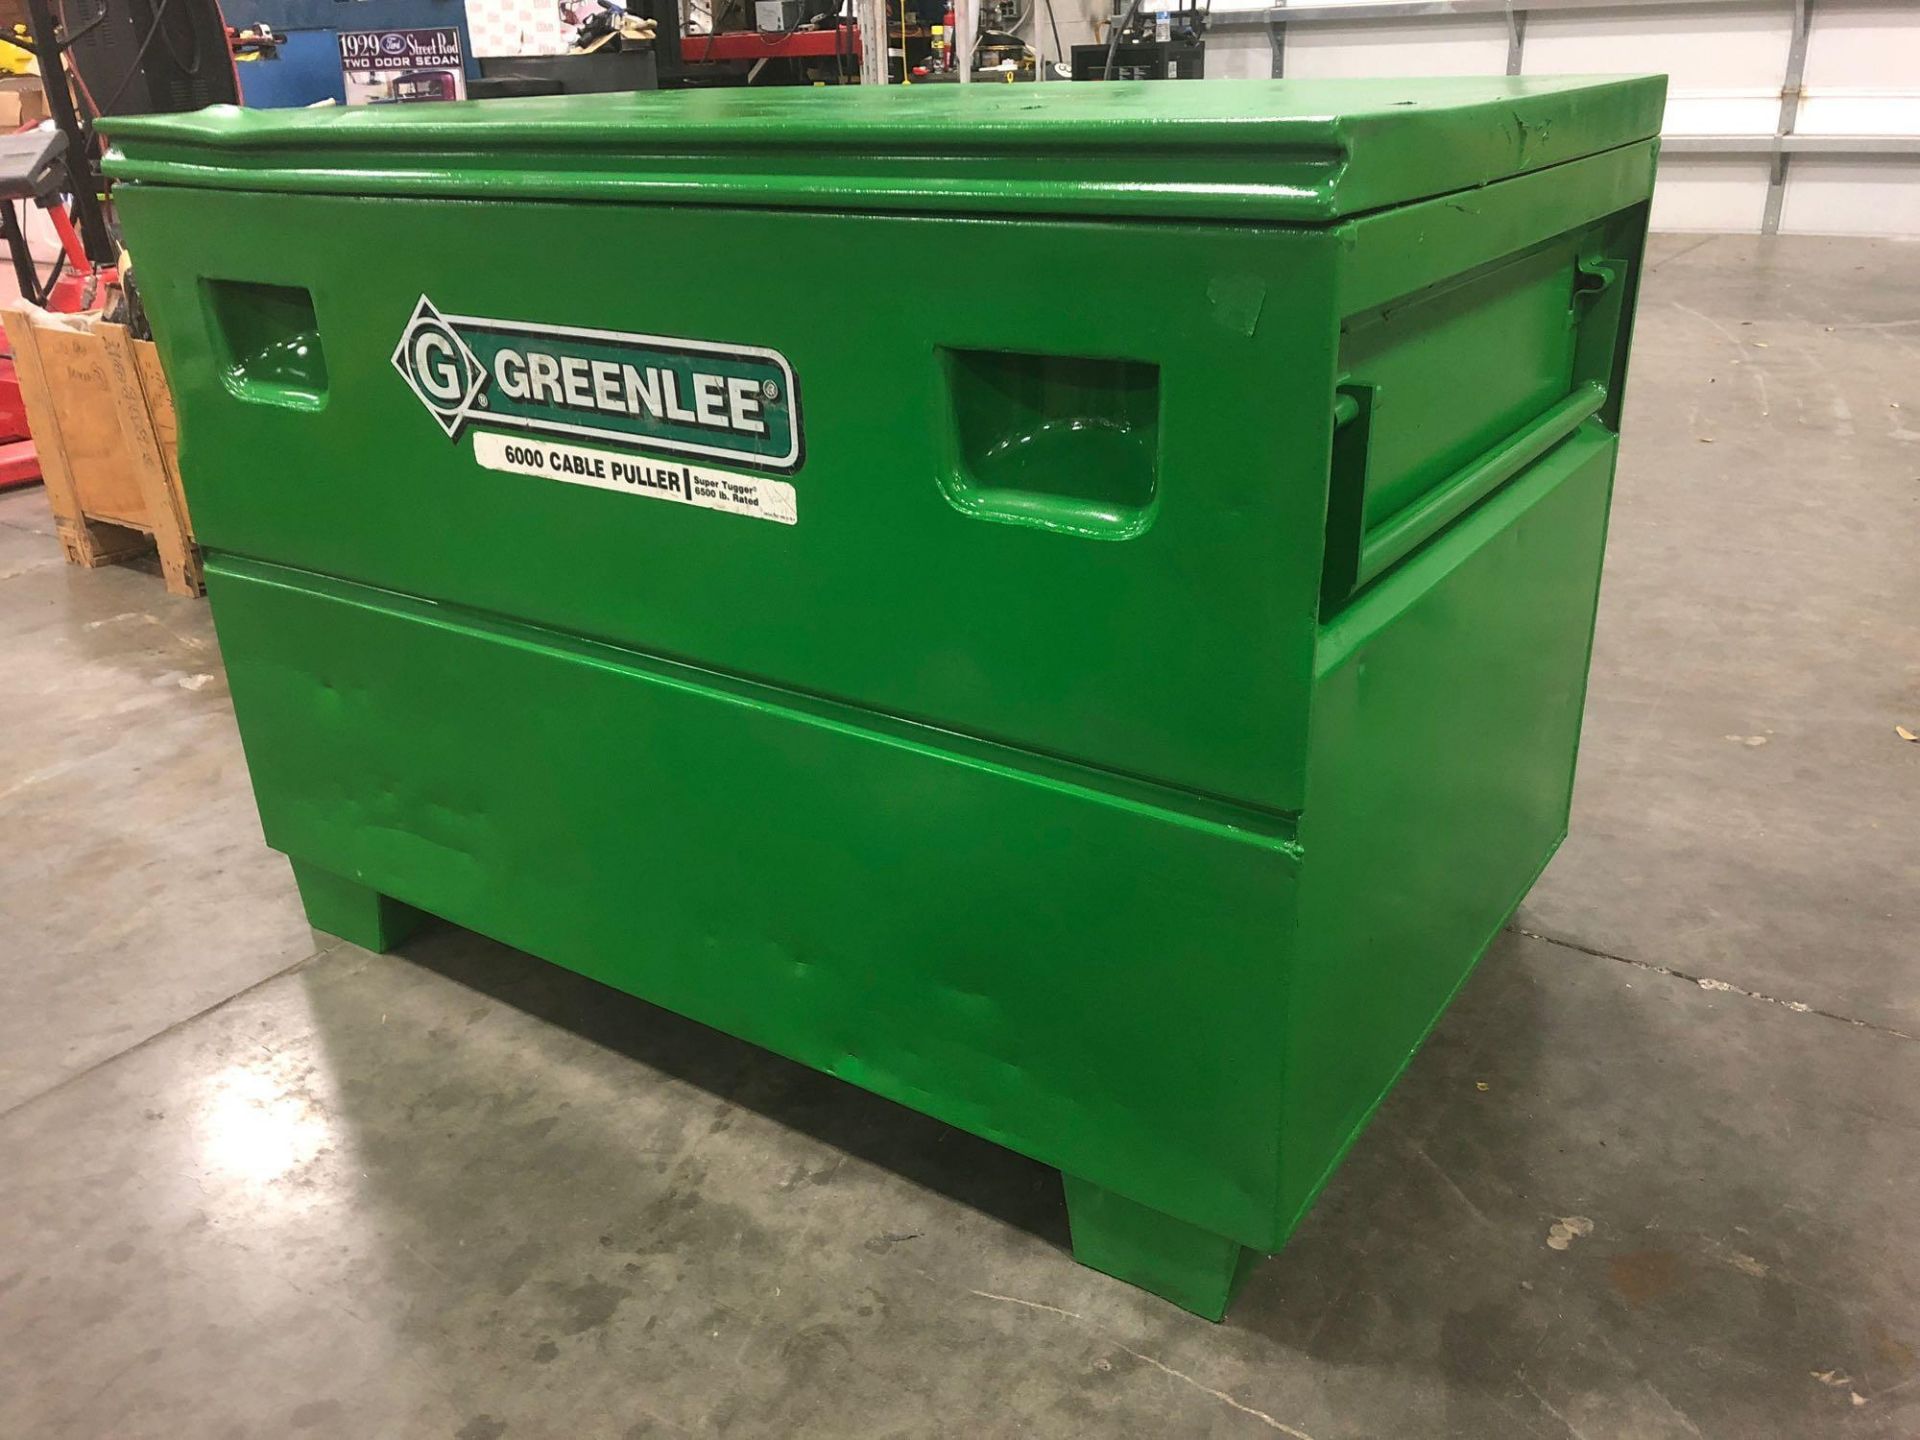 GREENLEE 6000 SUPER TUGGER CABLE PULLER WITH GREENLEE 3048/23362 STORAGE BOX 25 CU. FT.